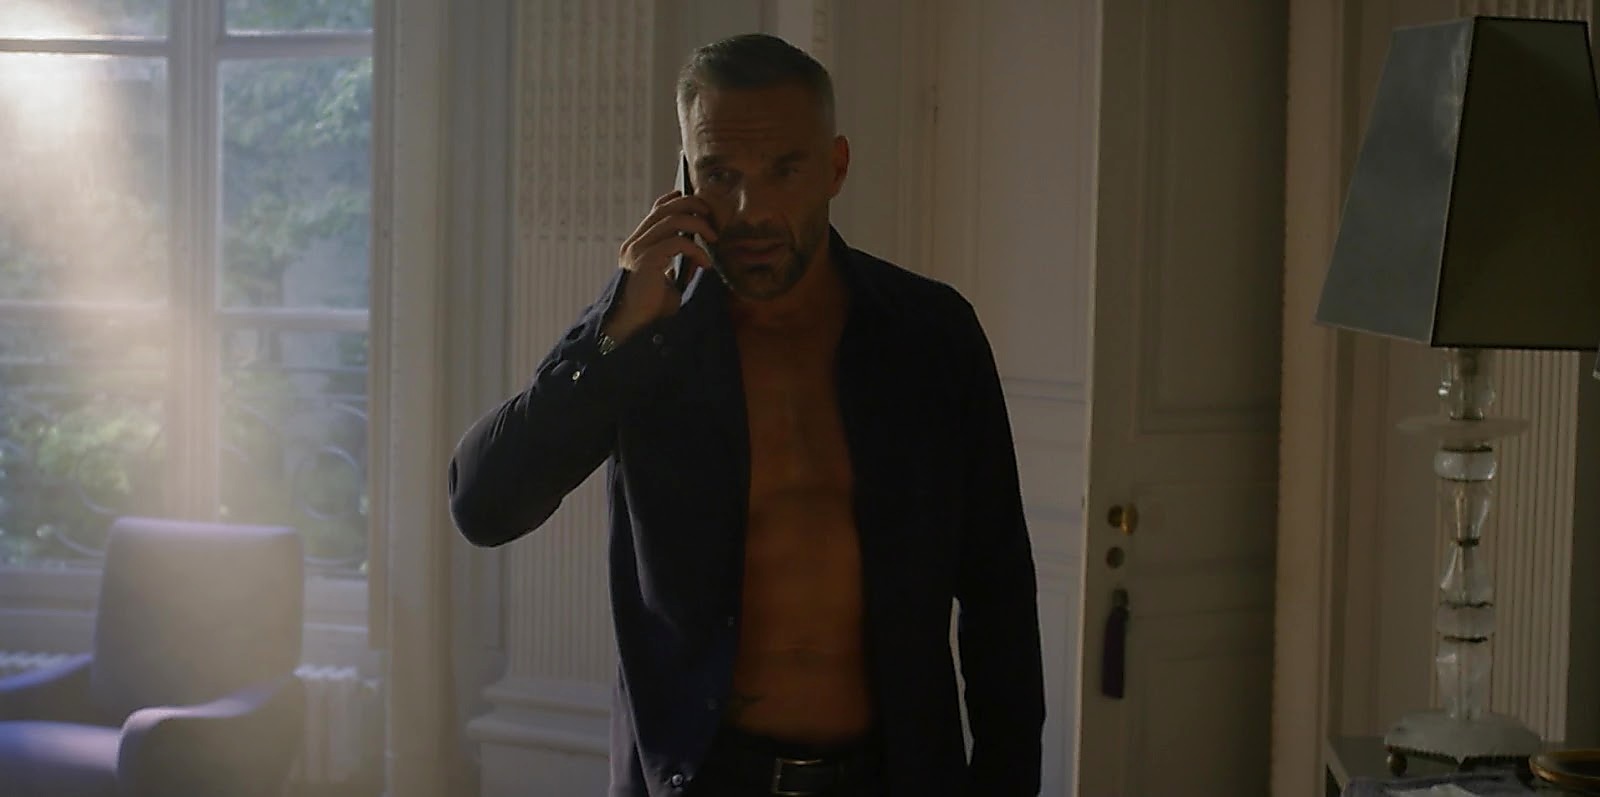 Philippe Bas sexy shirtless scene March 8, 2020, 2pm